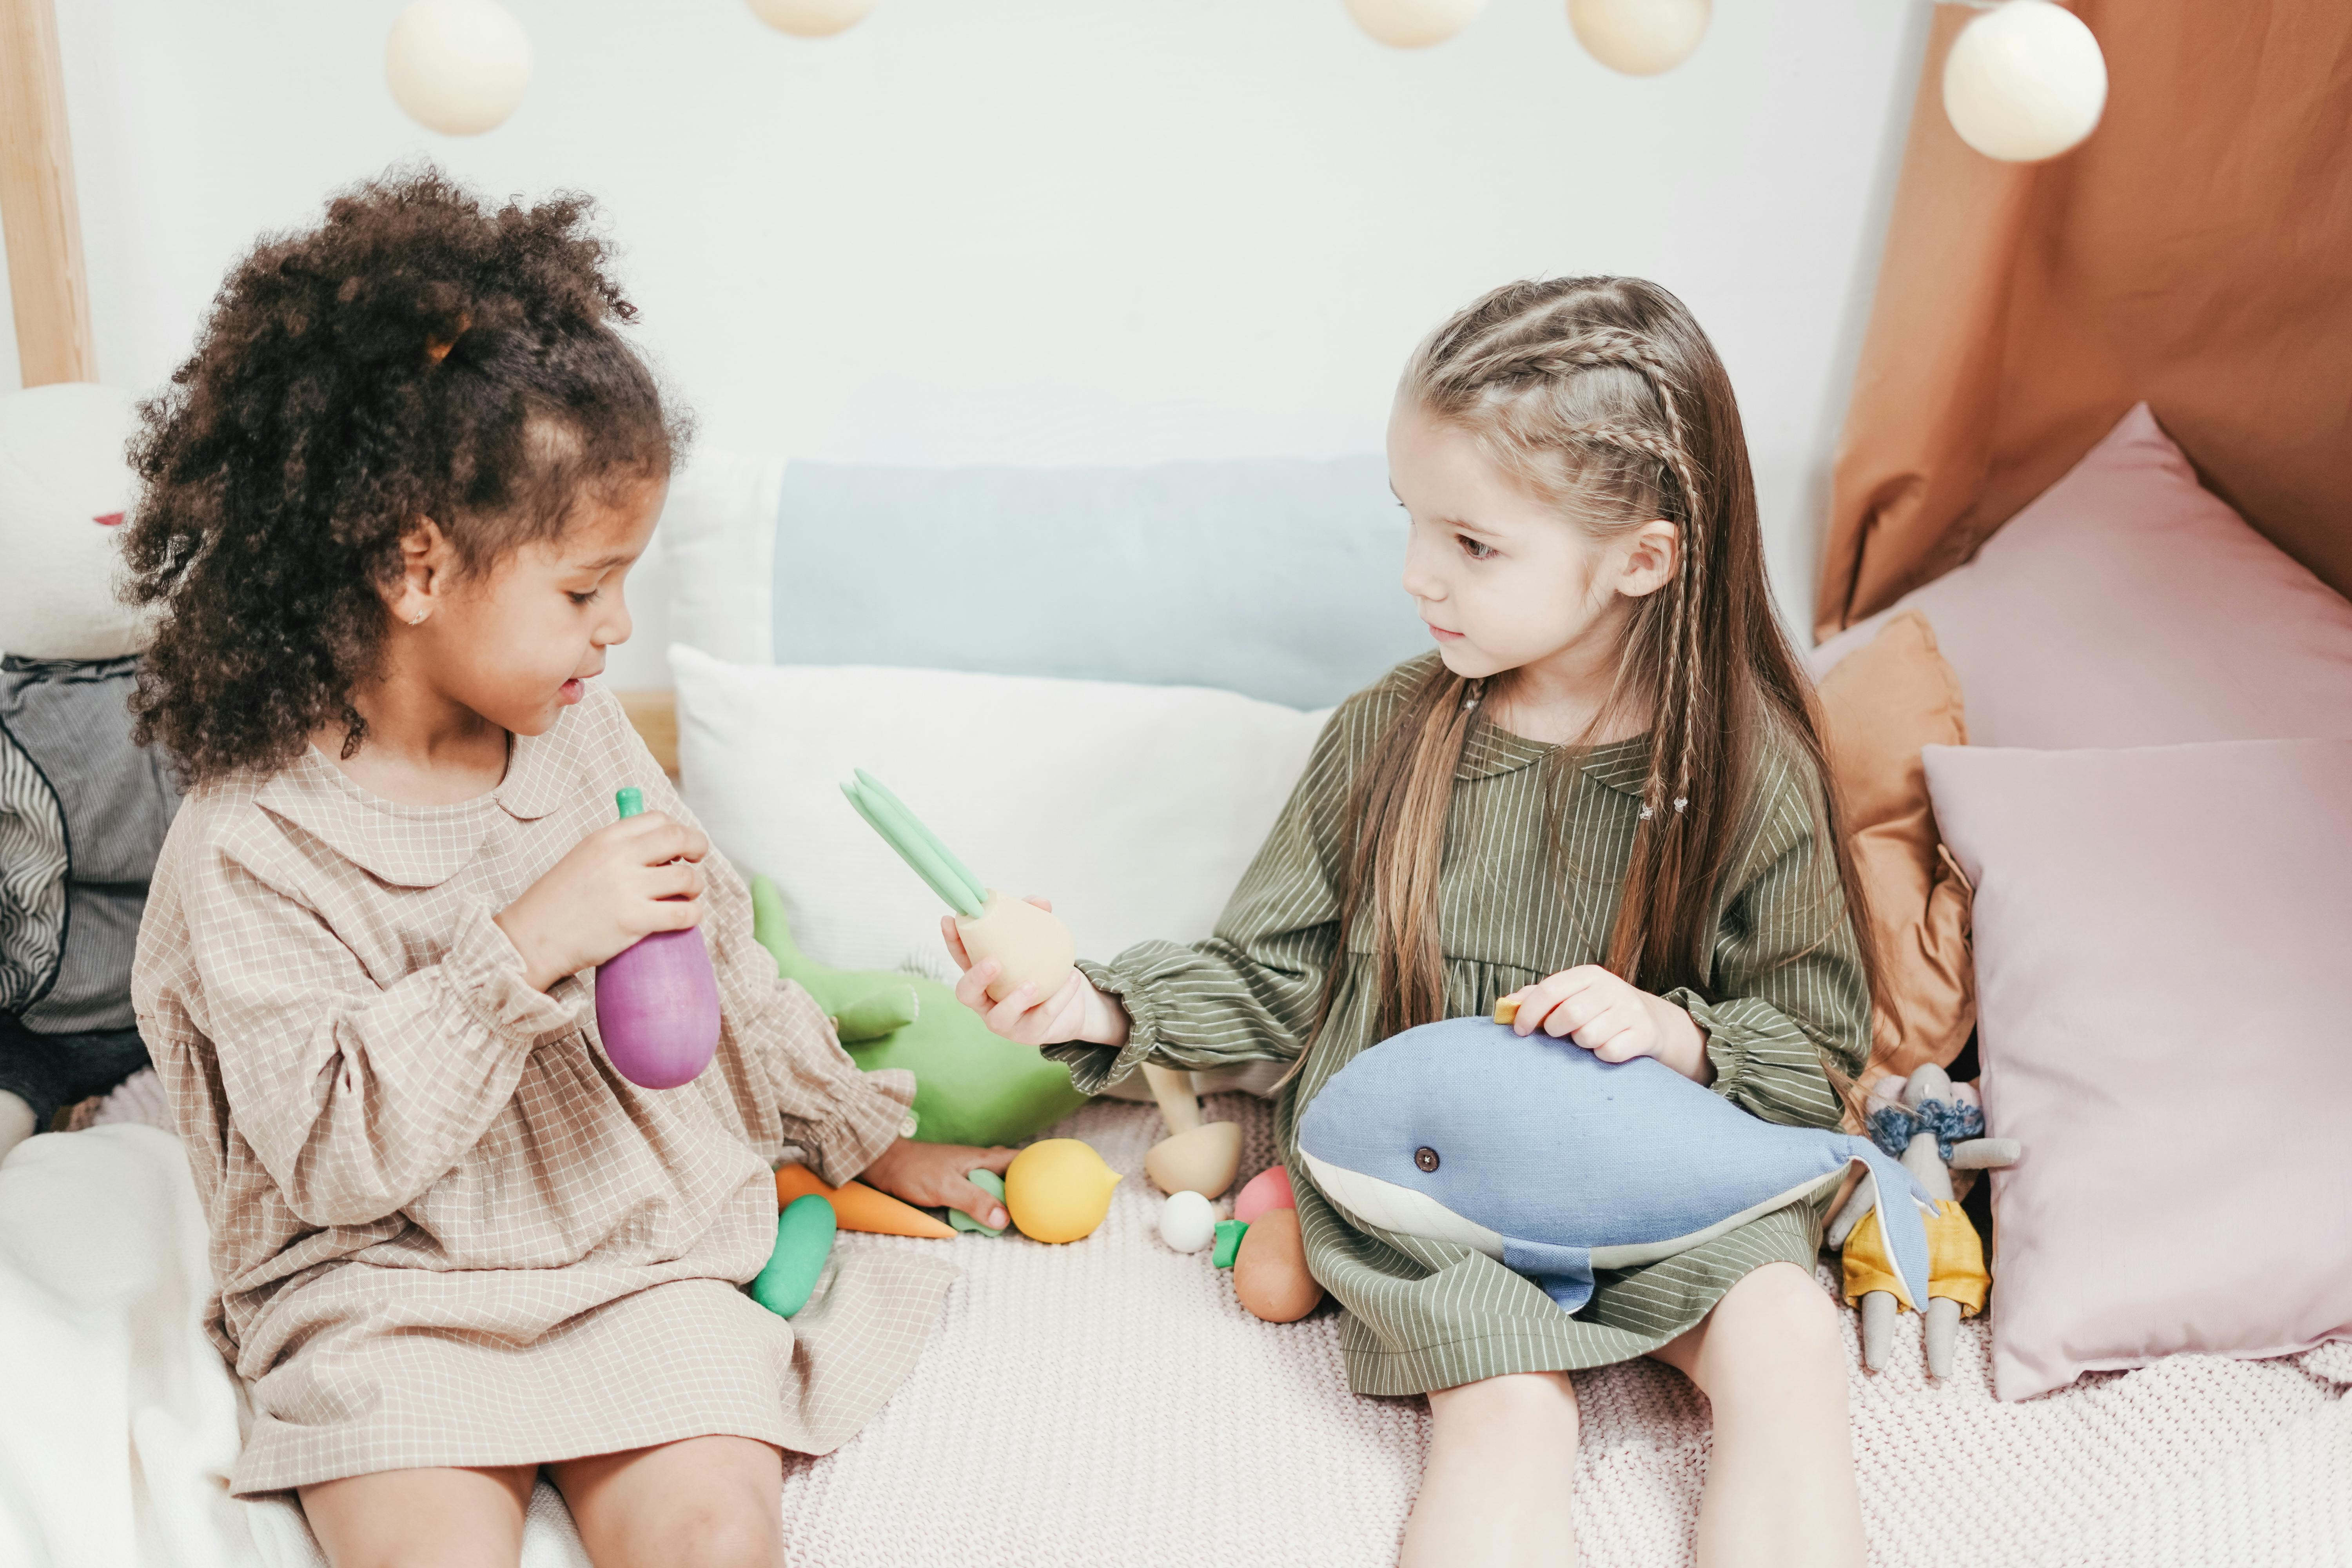 Two girls sharing toys | Source: Pexels